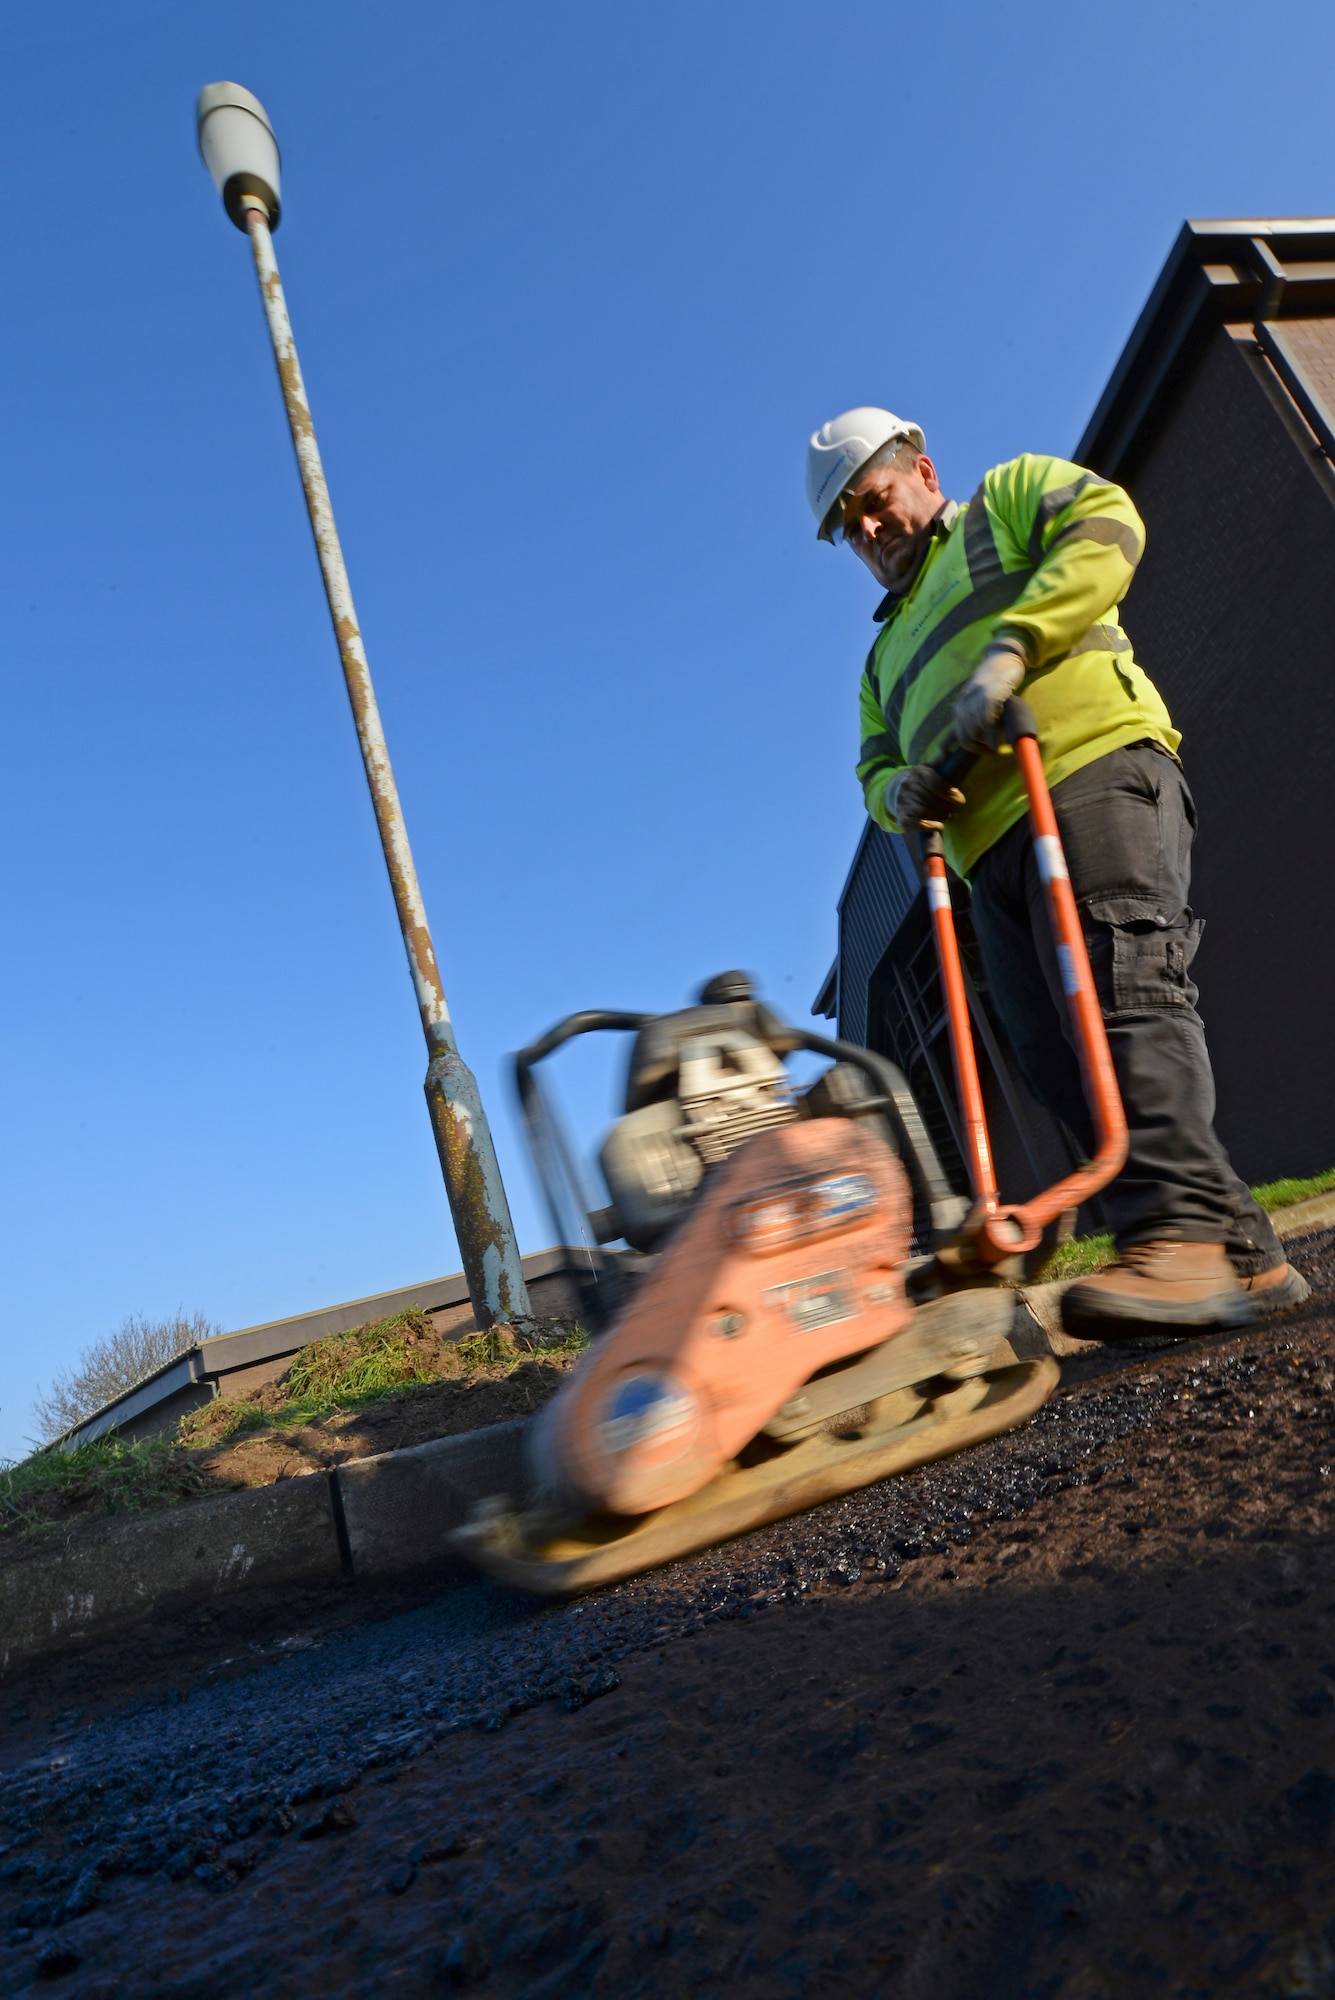 A contracted construction worker uses a plate tamper to compact asphalt in the 100th Logistics Readiness Squadron Vehicle Operations yard Jan. 20, 2016, on RAF Mildenhall, England. Workers filled uneven surfaces with tarmac and compacted it down to provide an even surface for the asphalt paver. (U.S. Air Force photo by Staff Sgt. Micaiah Anthony/Released))